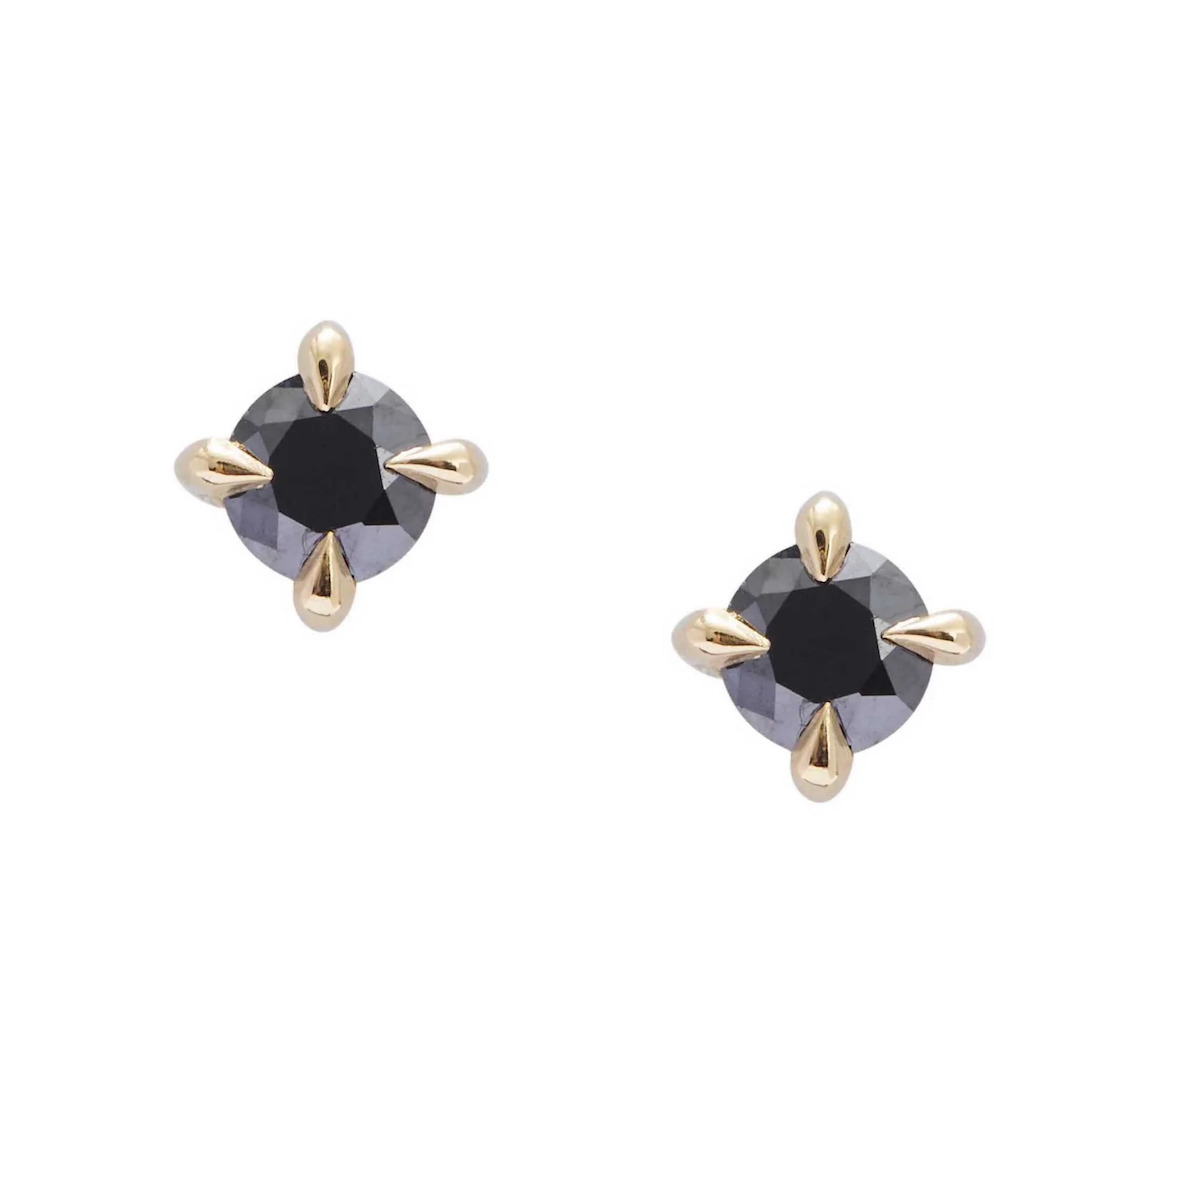 wednesday netflix gothic revival natural diamond jewelry earrings